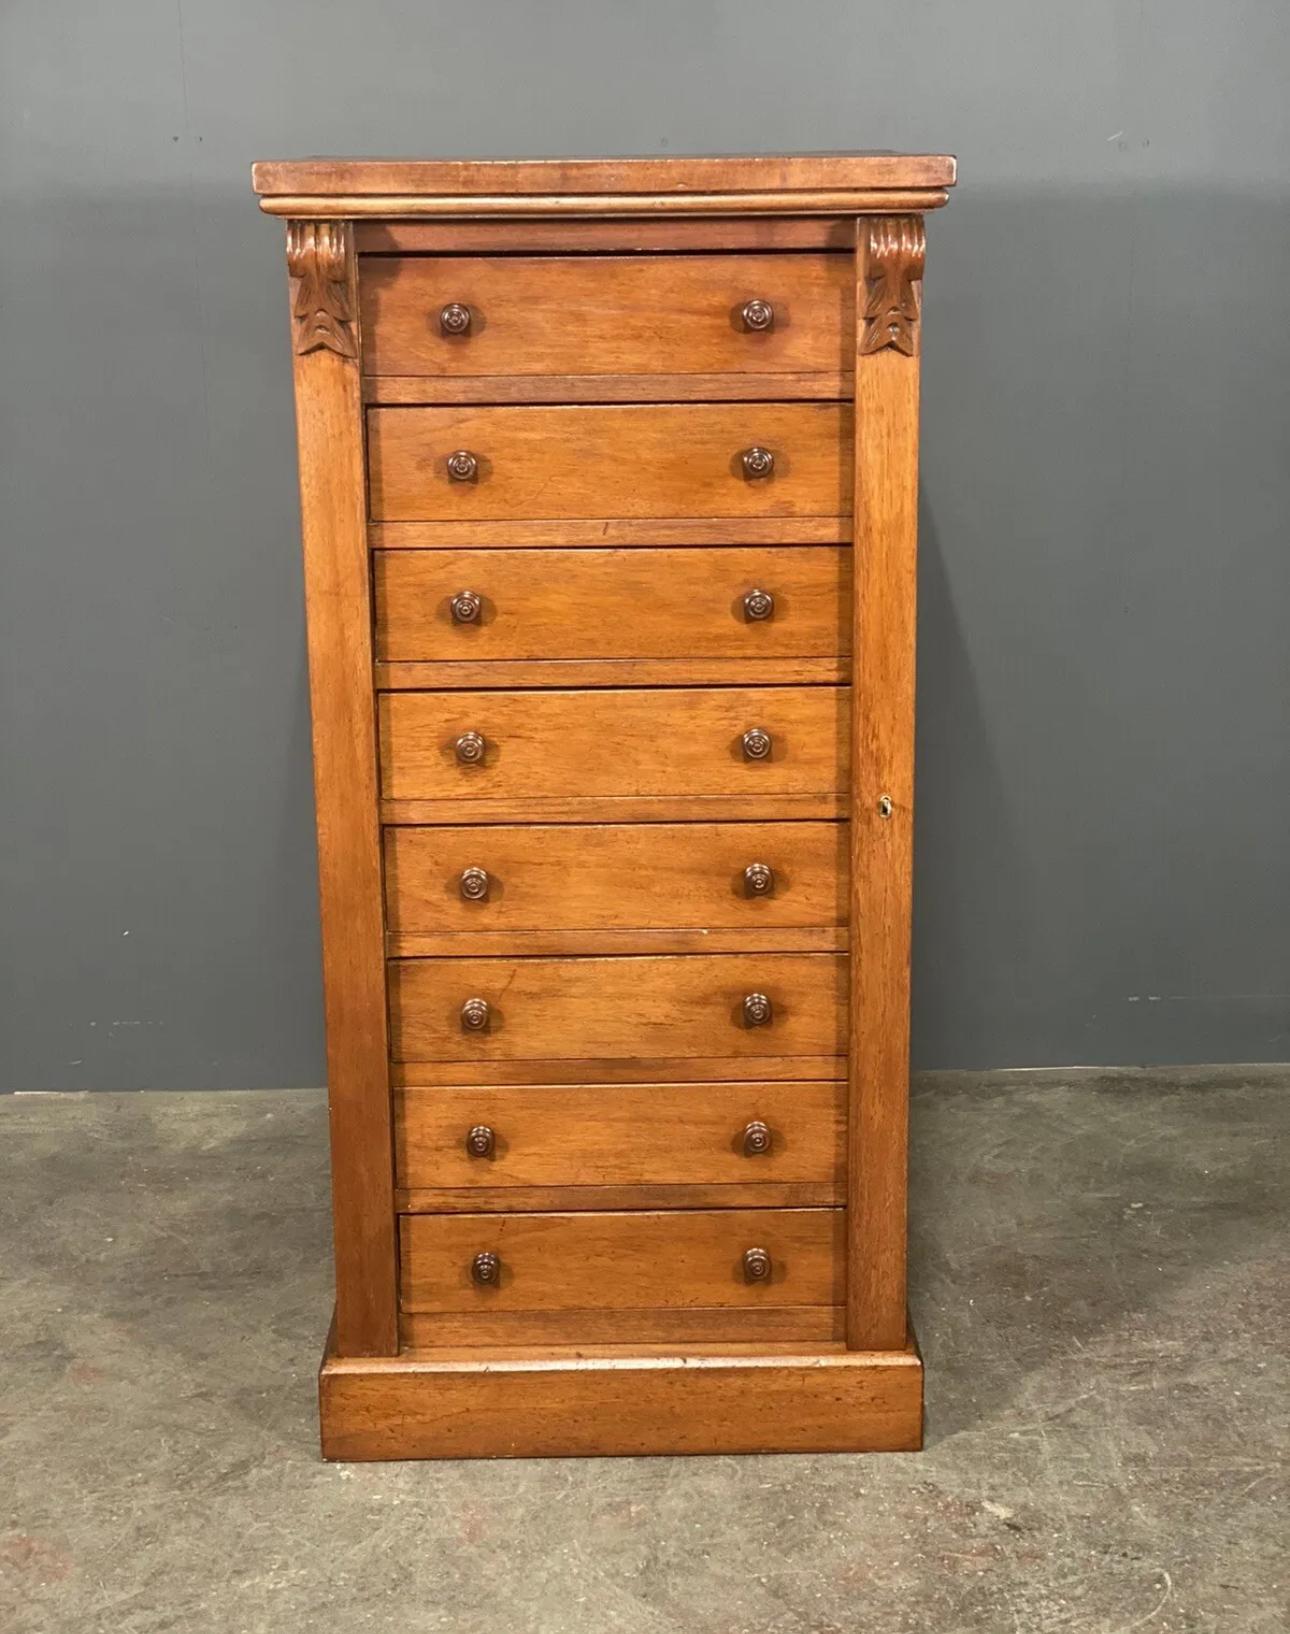 Large Wellington chest dating to the Edwardian period, consisting of eight dovetailed drawers with original hand turned mahogany knobs. In very good condition with working lock and two keys. 